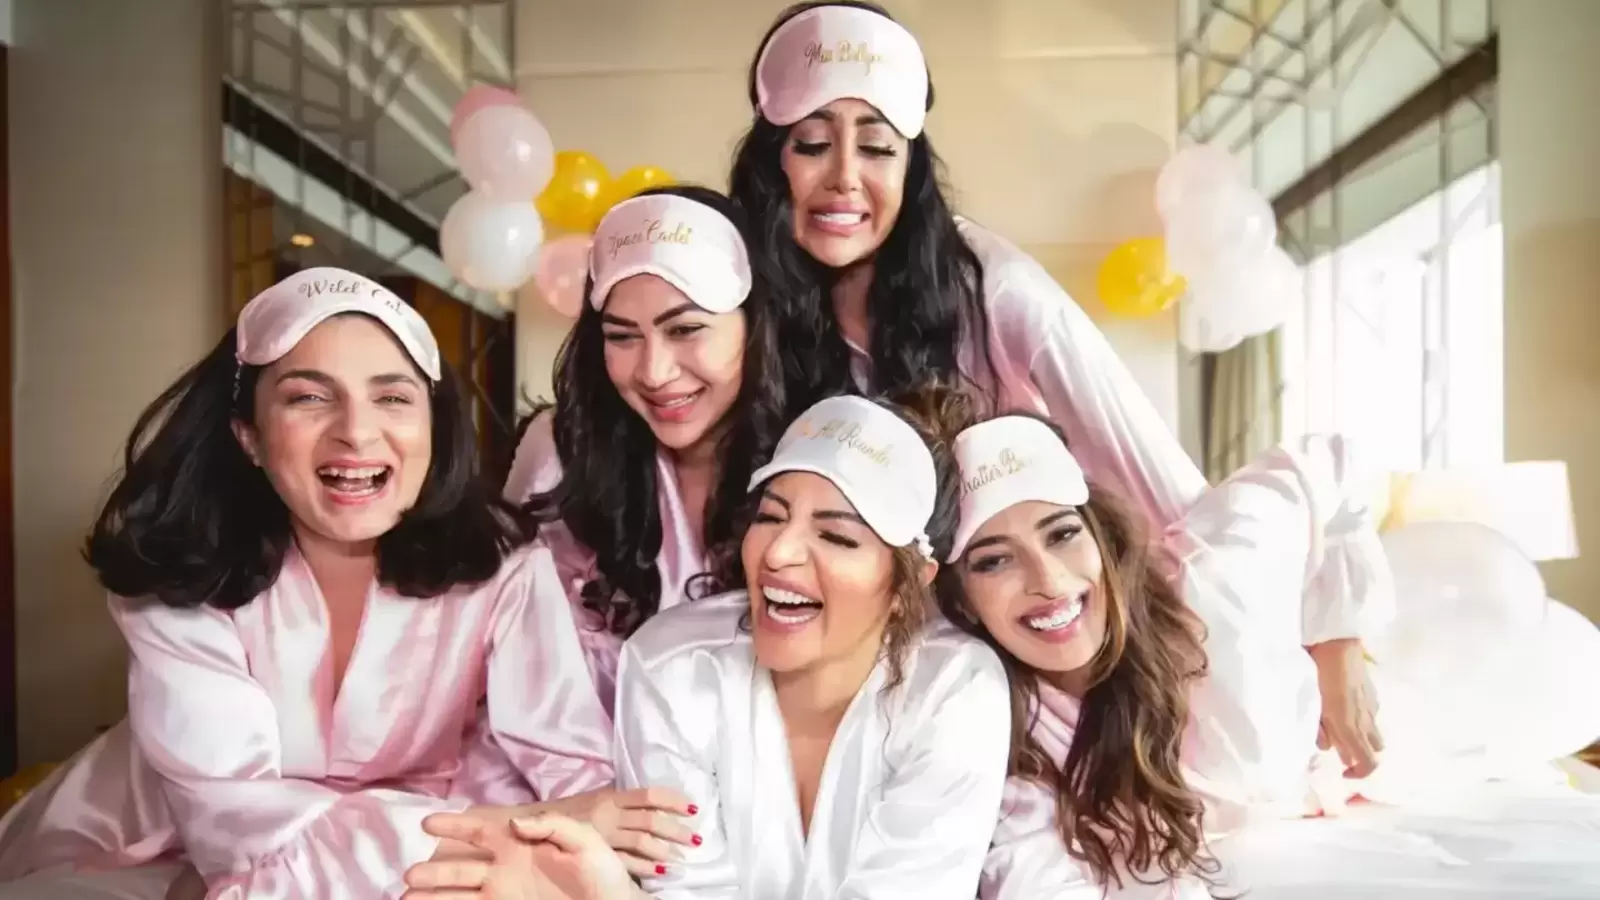 Inside Shama Sikander’s white and pink-themed bachelorette with friends: ‘Finally getting bridal vibes’. See pics